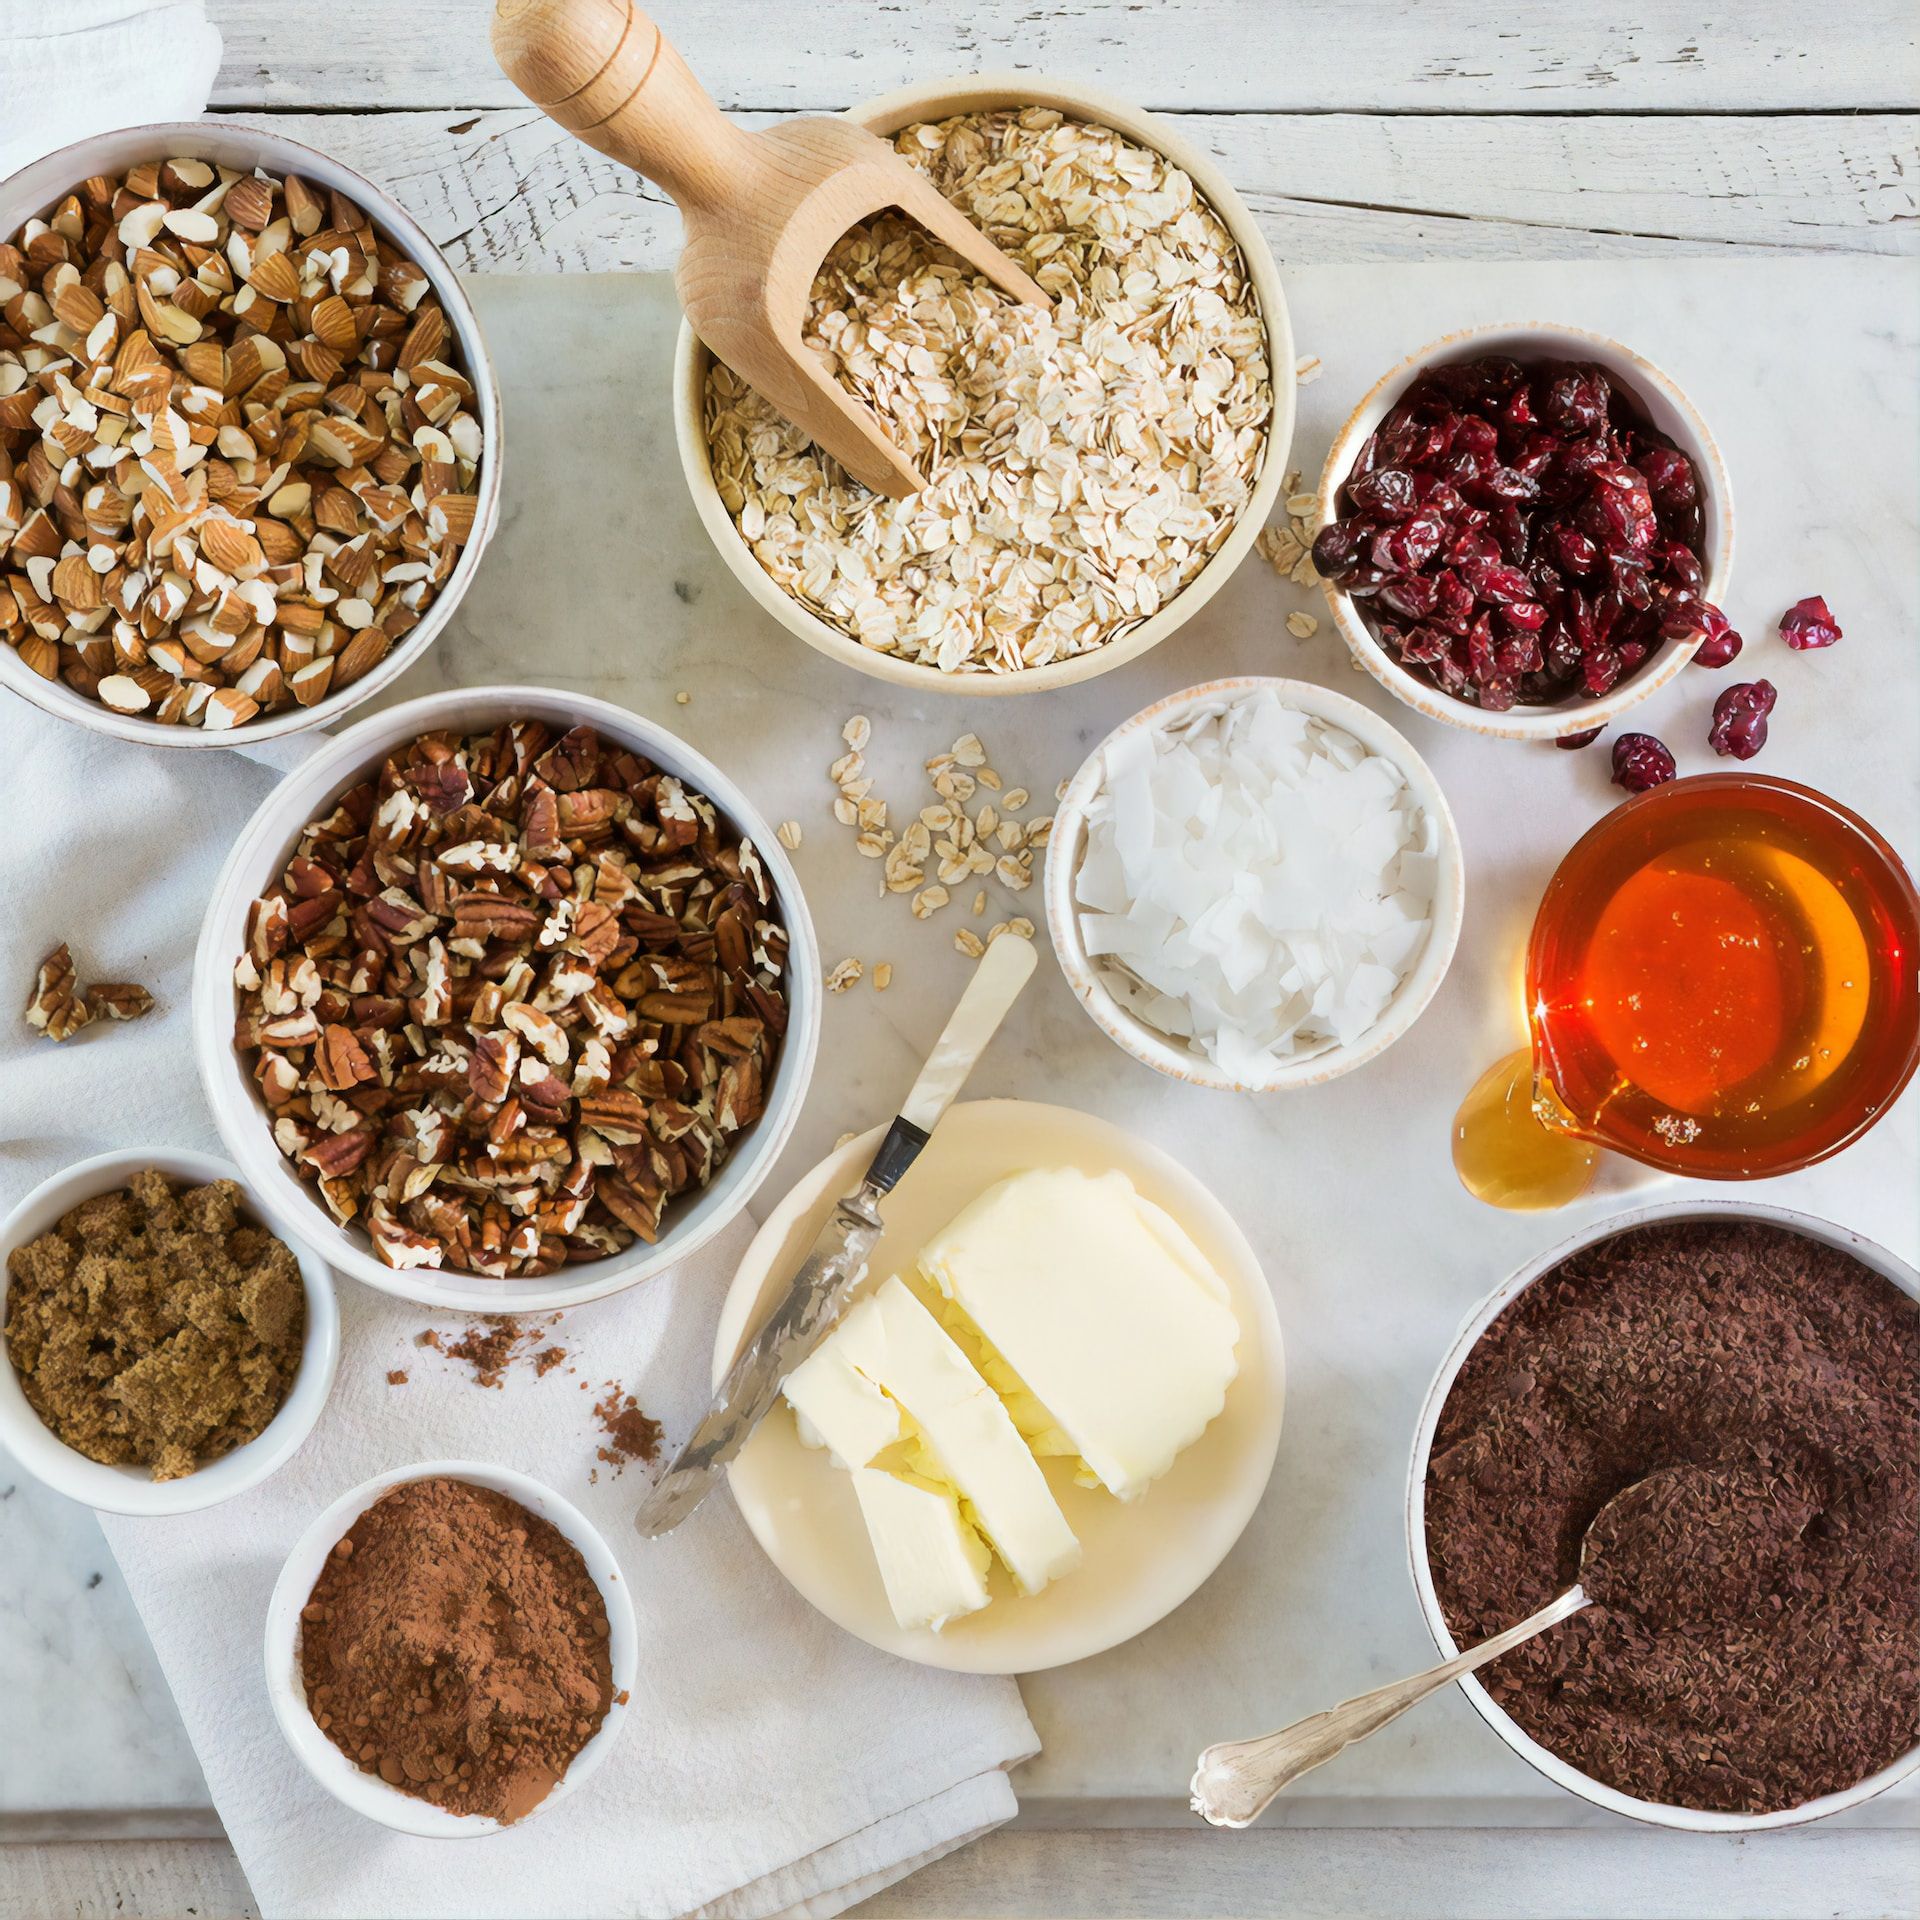 Chocolate, nuts, oats, and other baking ingredients 